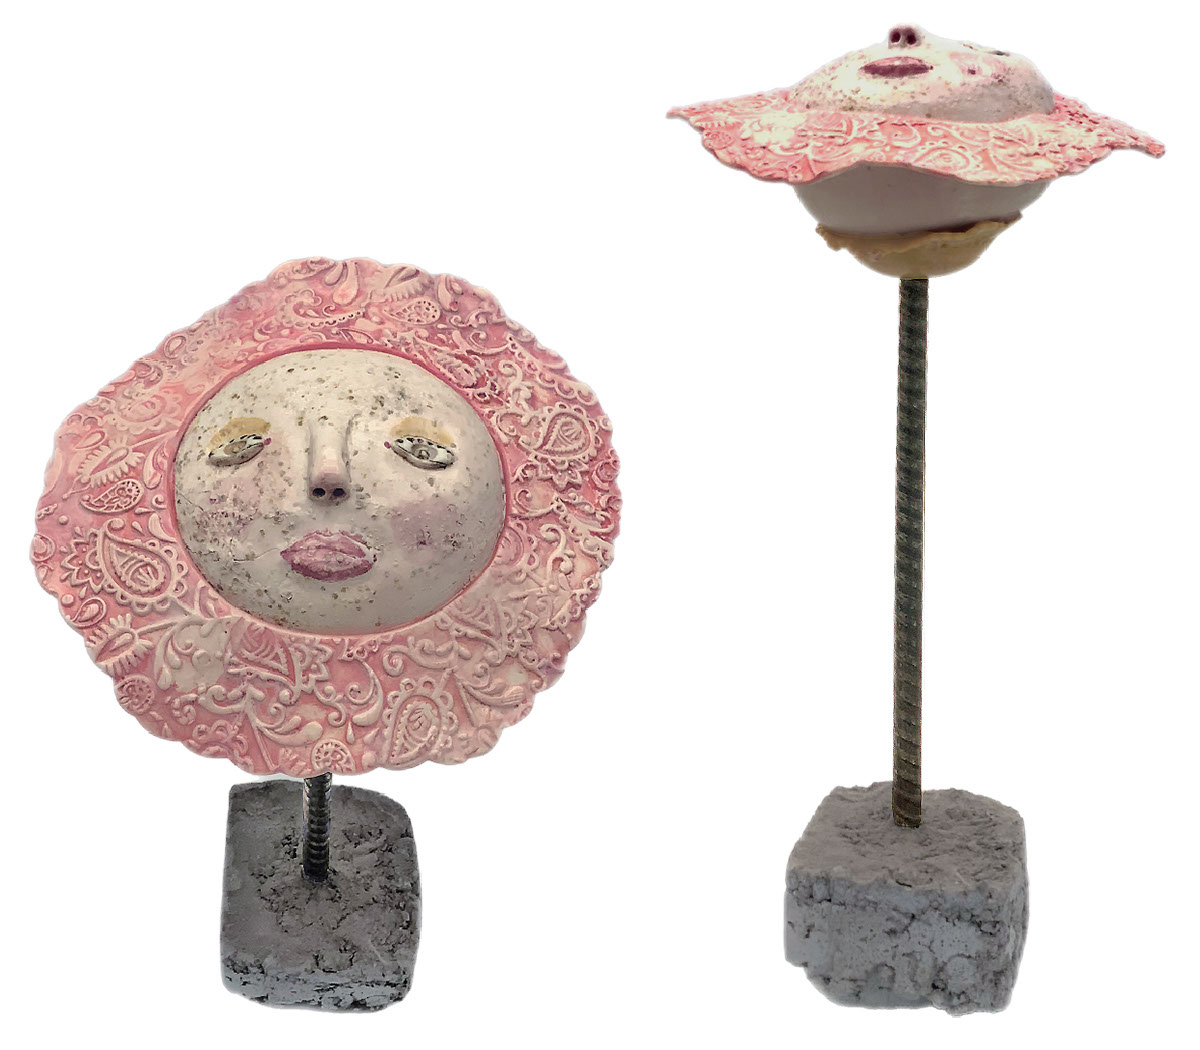 LISA MERTINS - SOFT RED SUN W/ FACE ON STAND - CERAMIC - 6.5 x 12 x 6.5